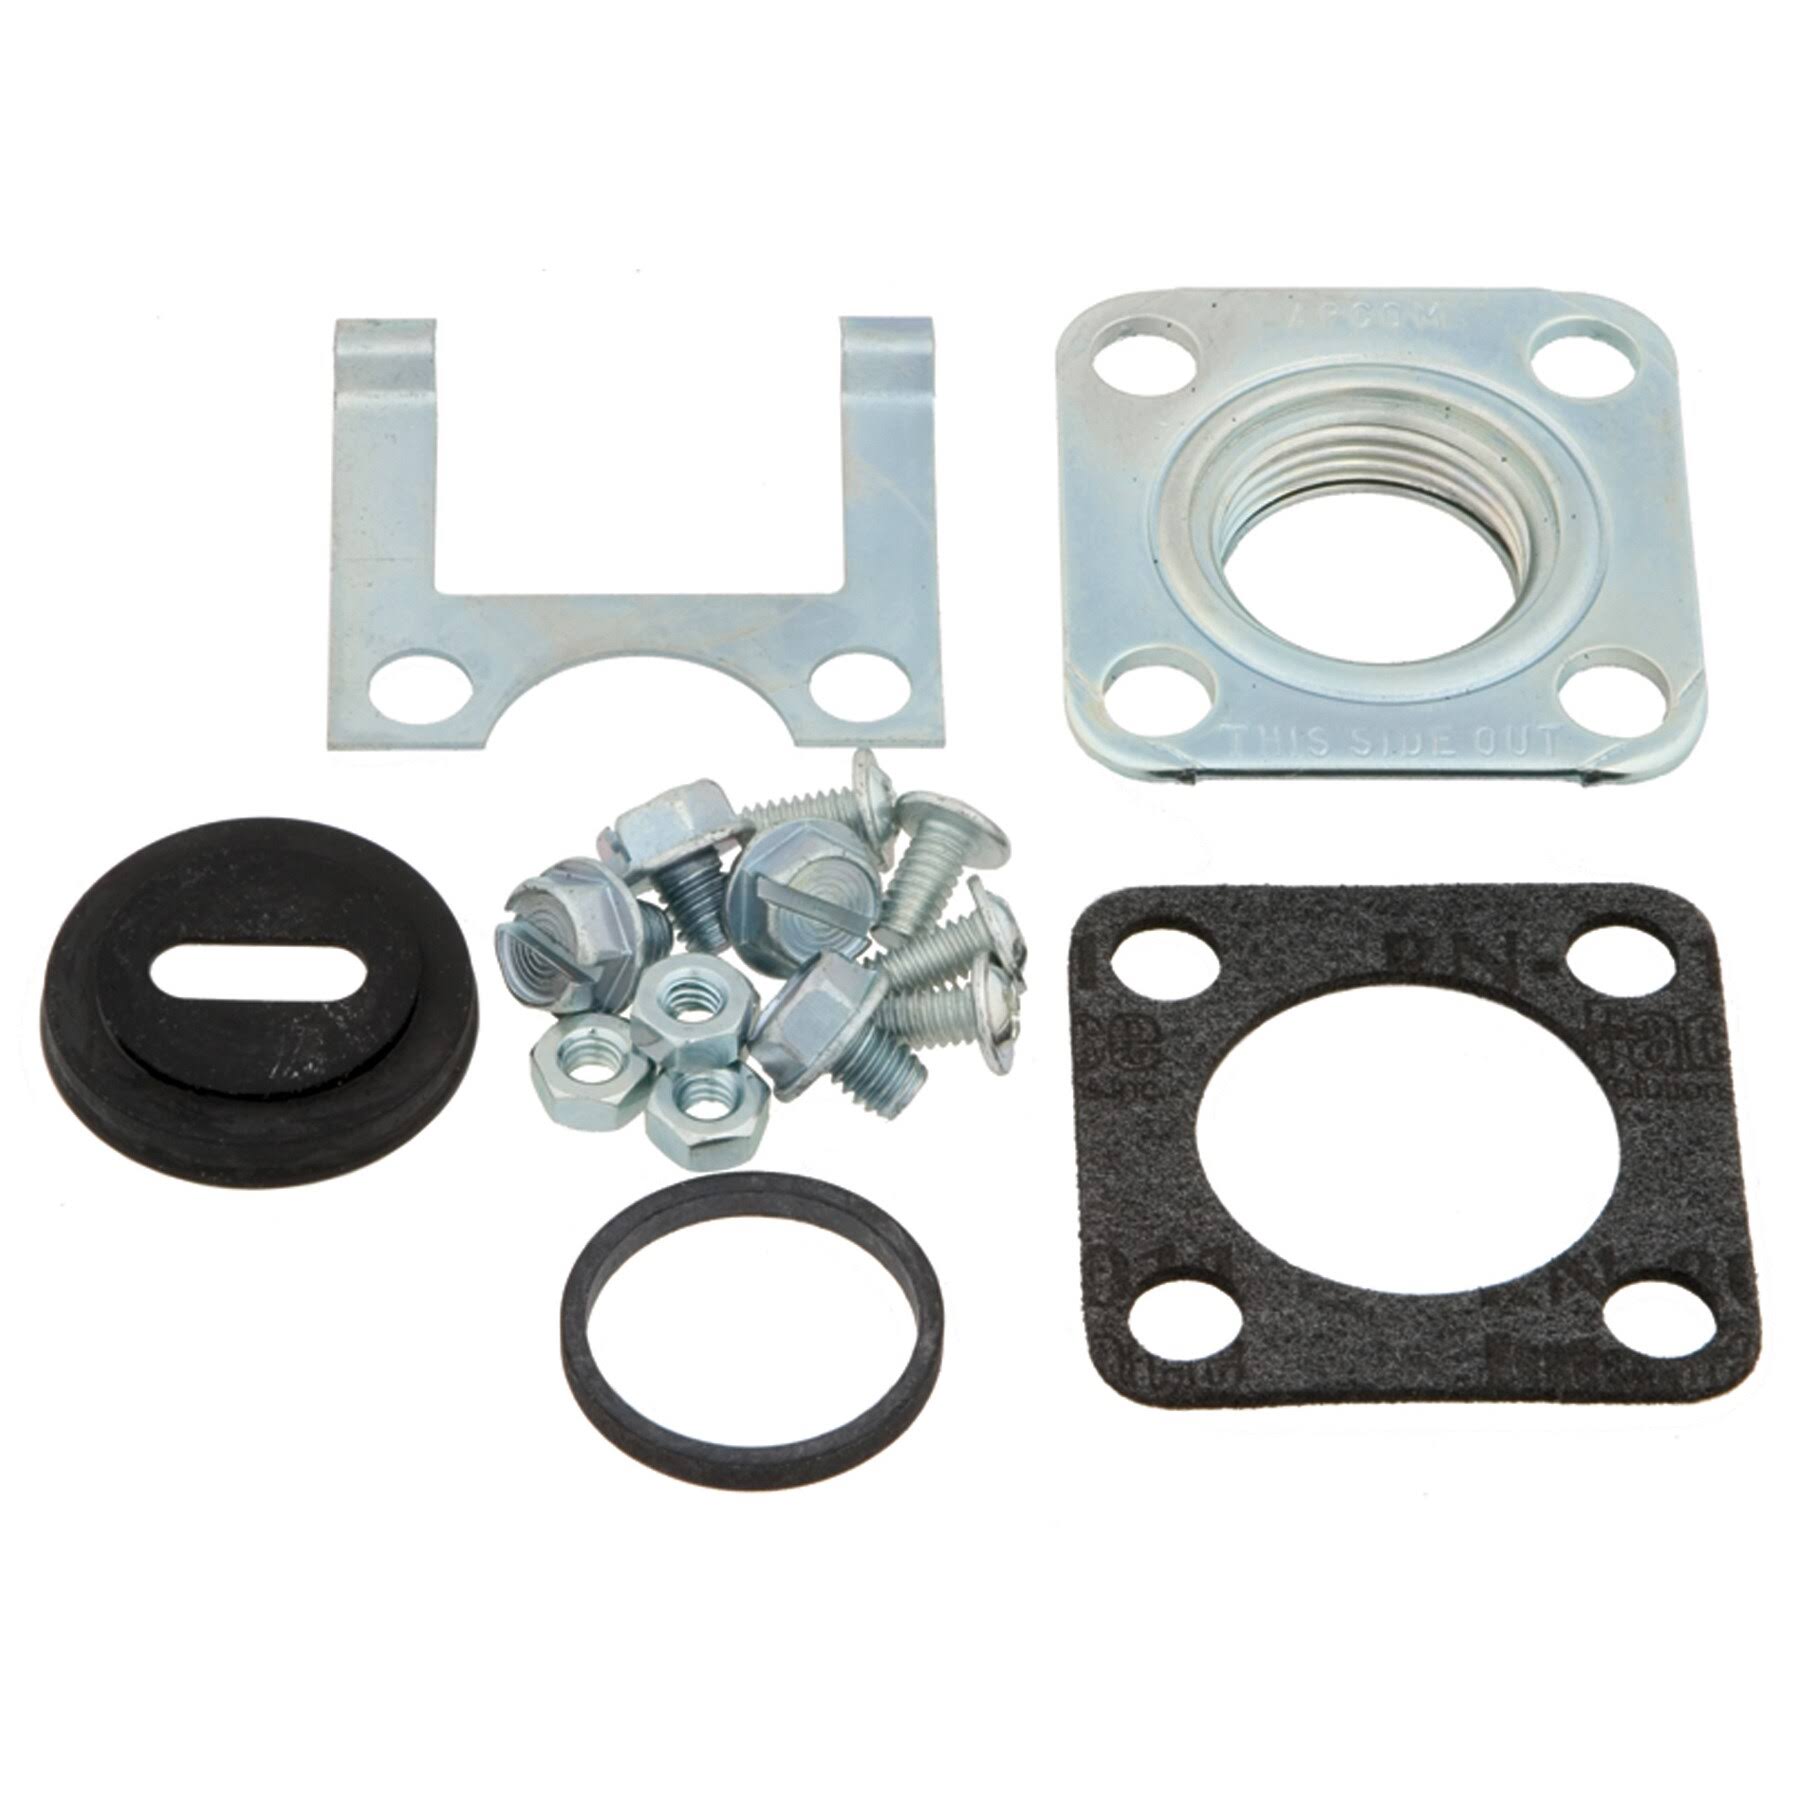 Reliance Water Heater Element Adapter Kit